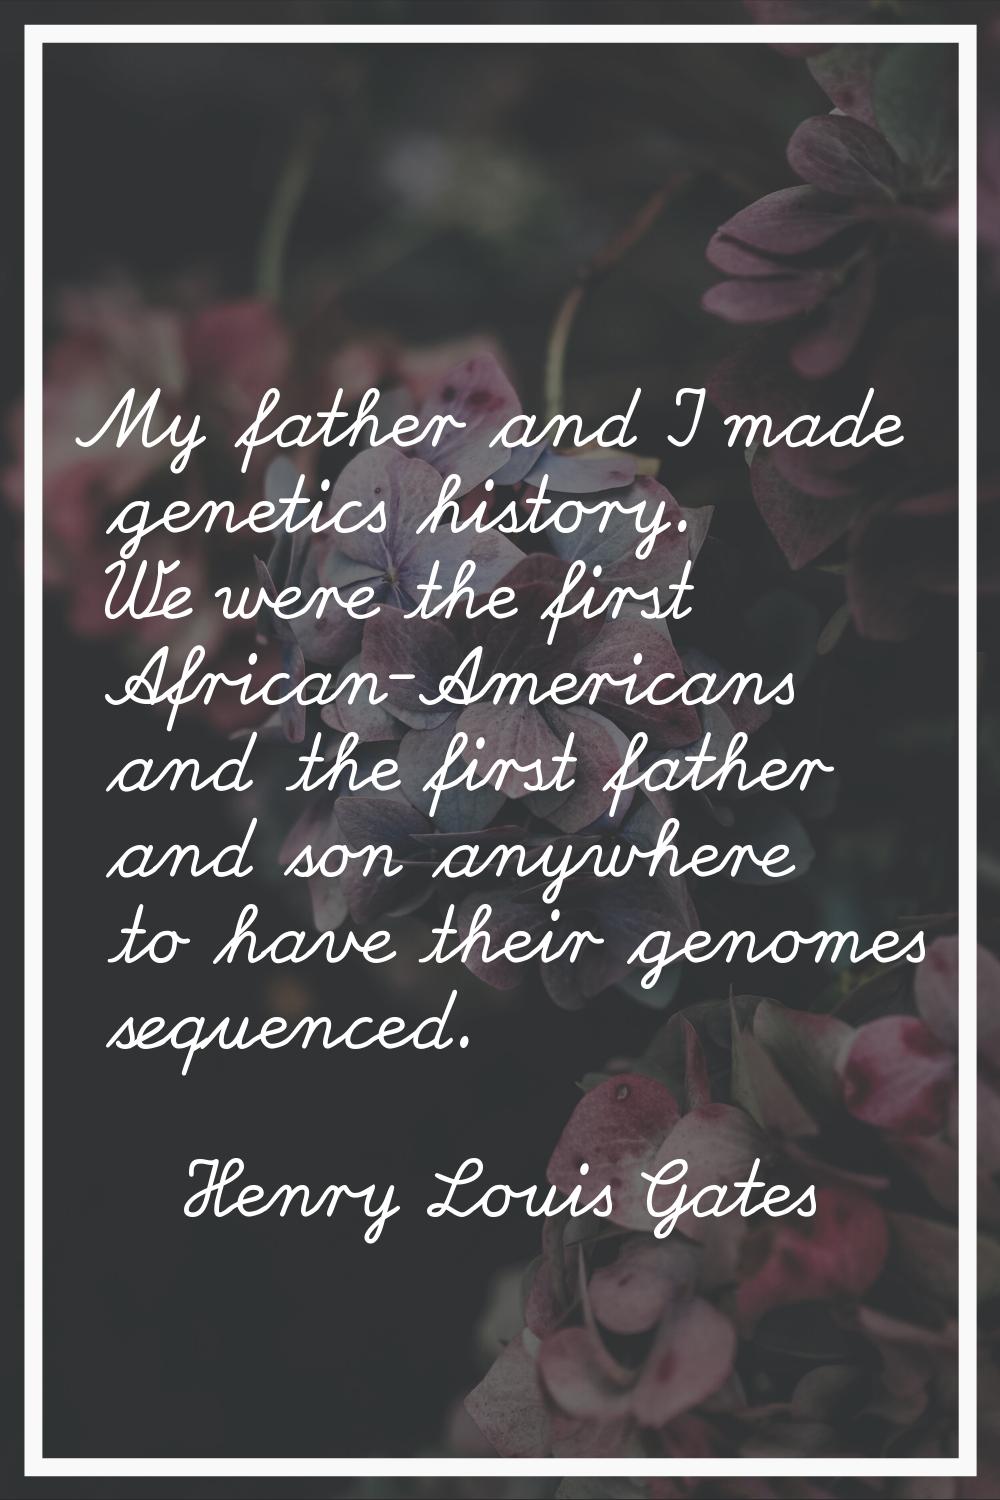 My father and I made genetics history. We were the first African-Americans and the first father and